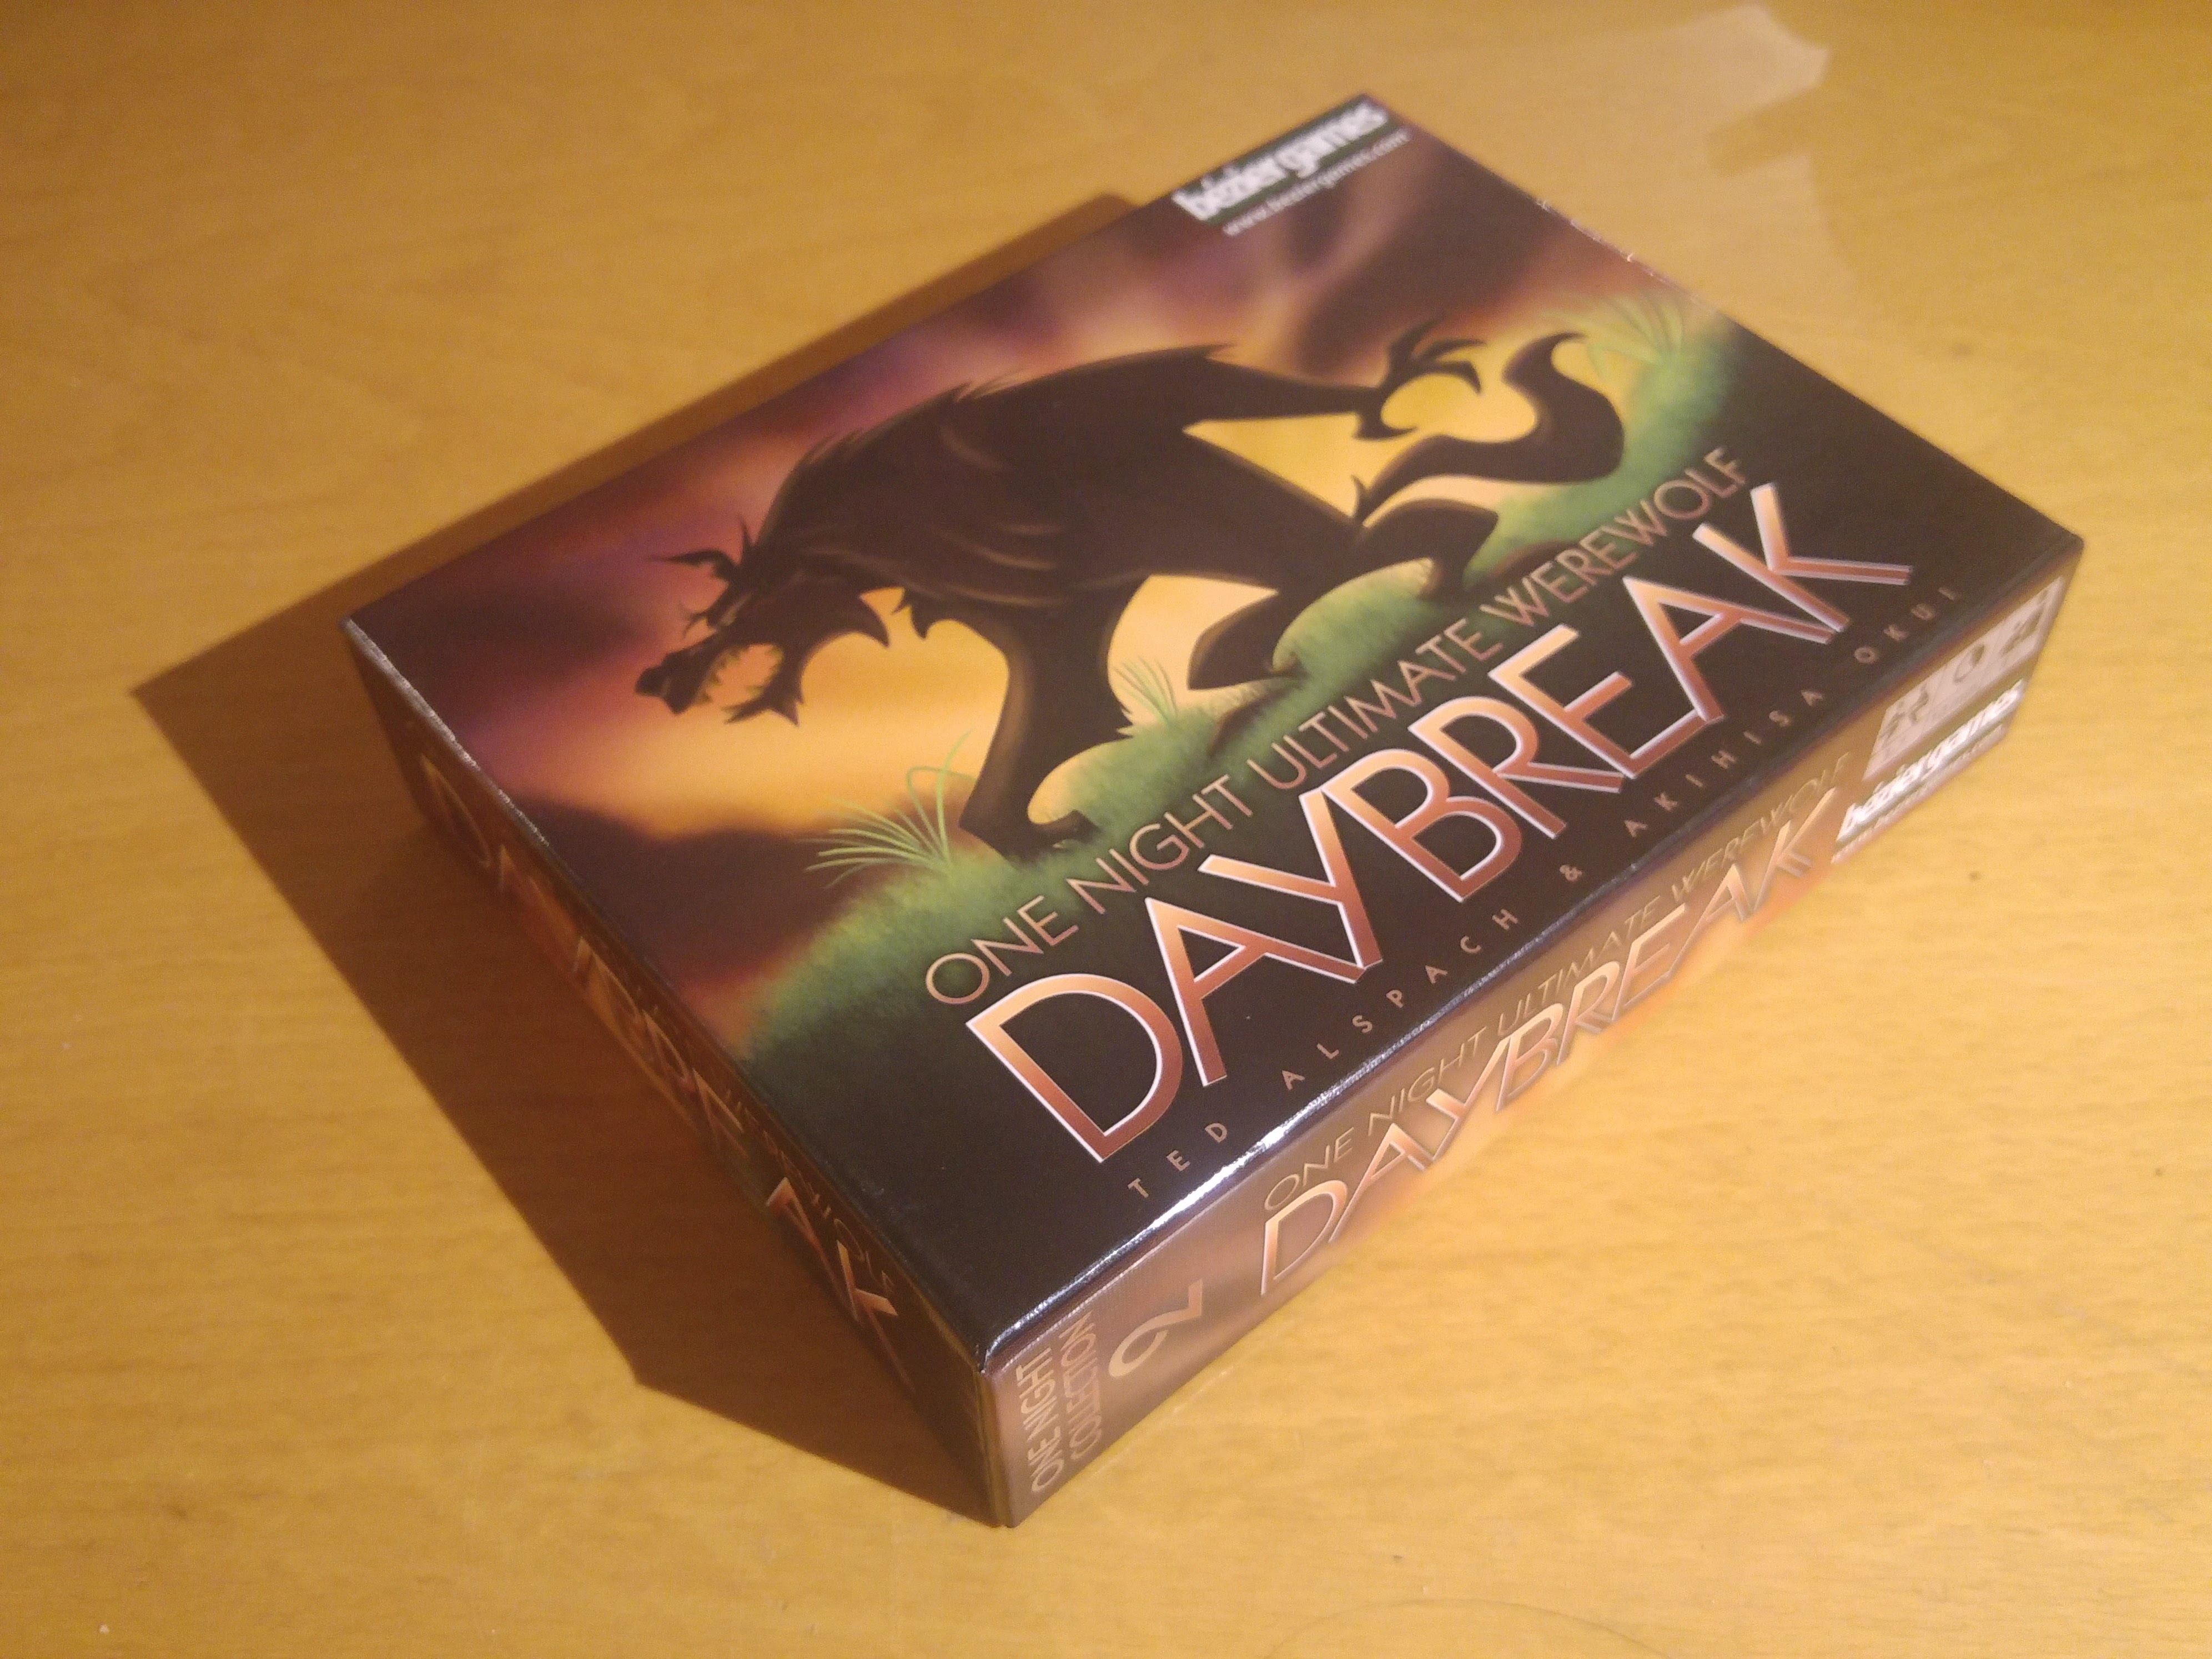 Review: One Night Ultimate Werewolf